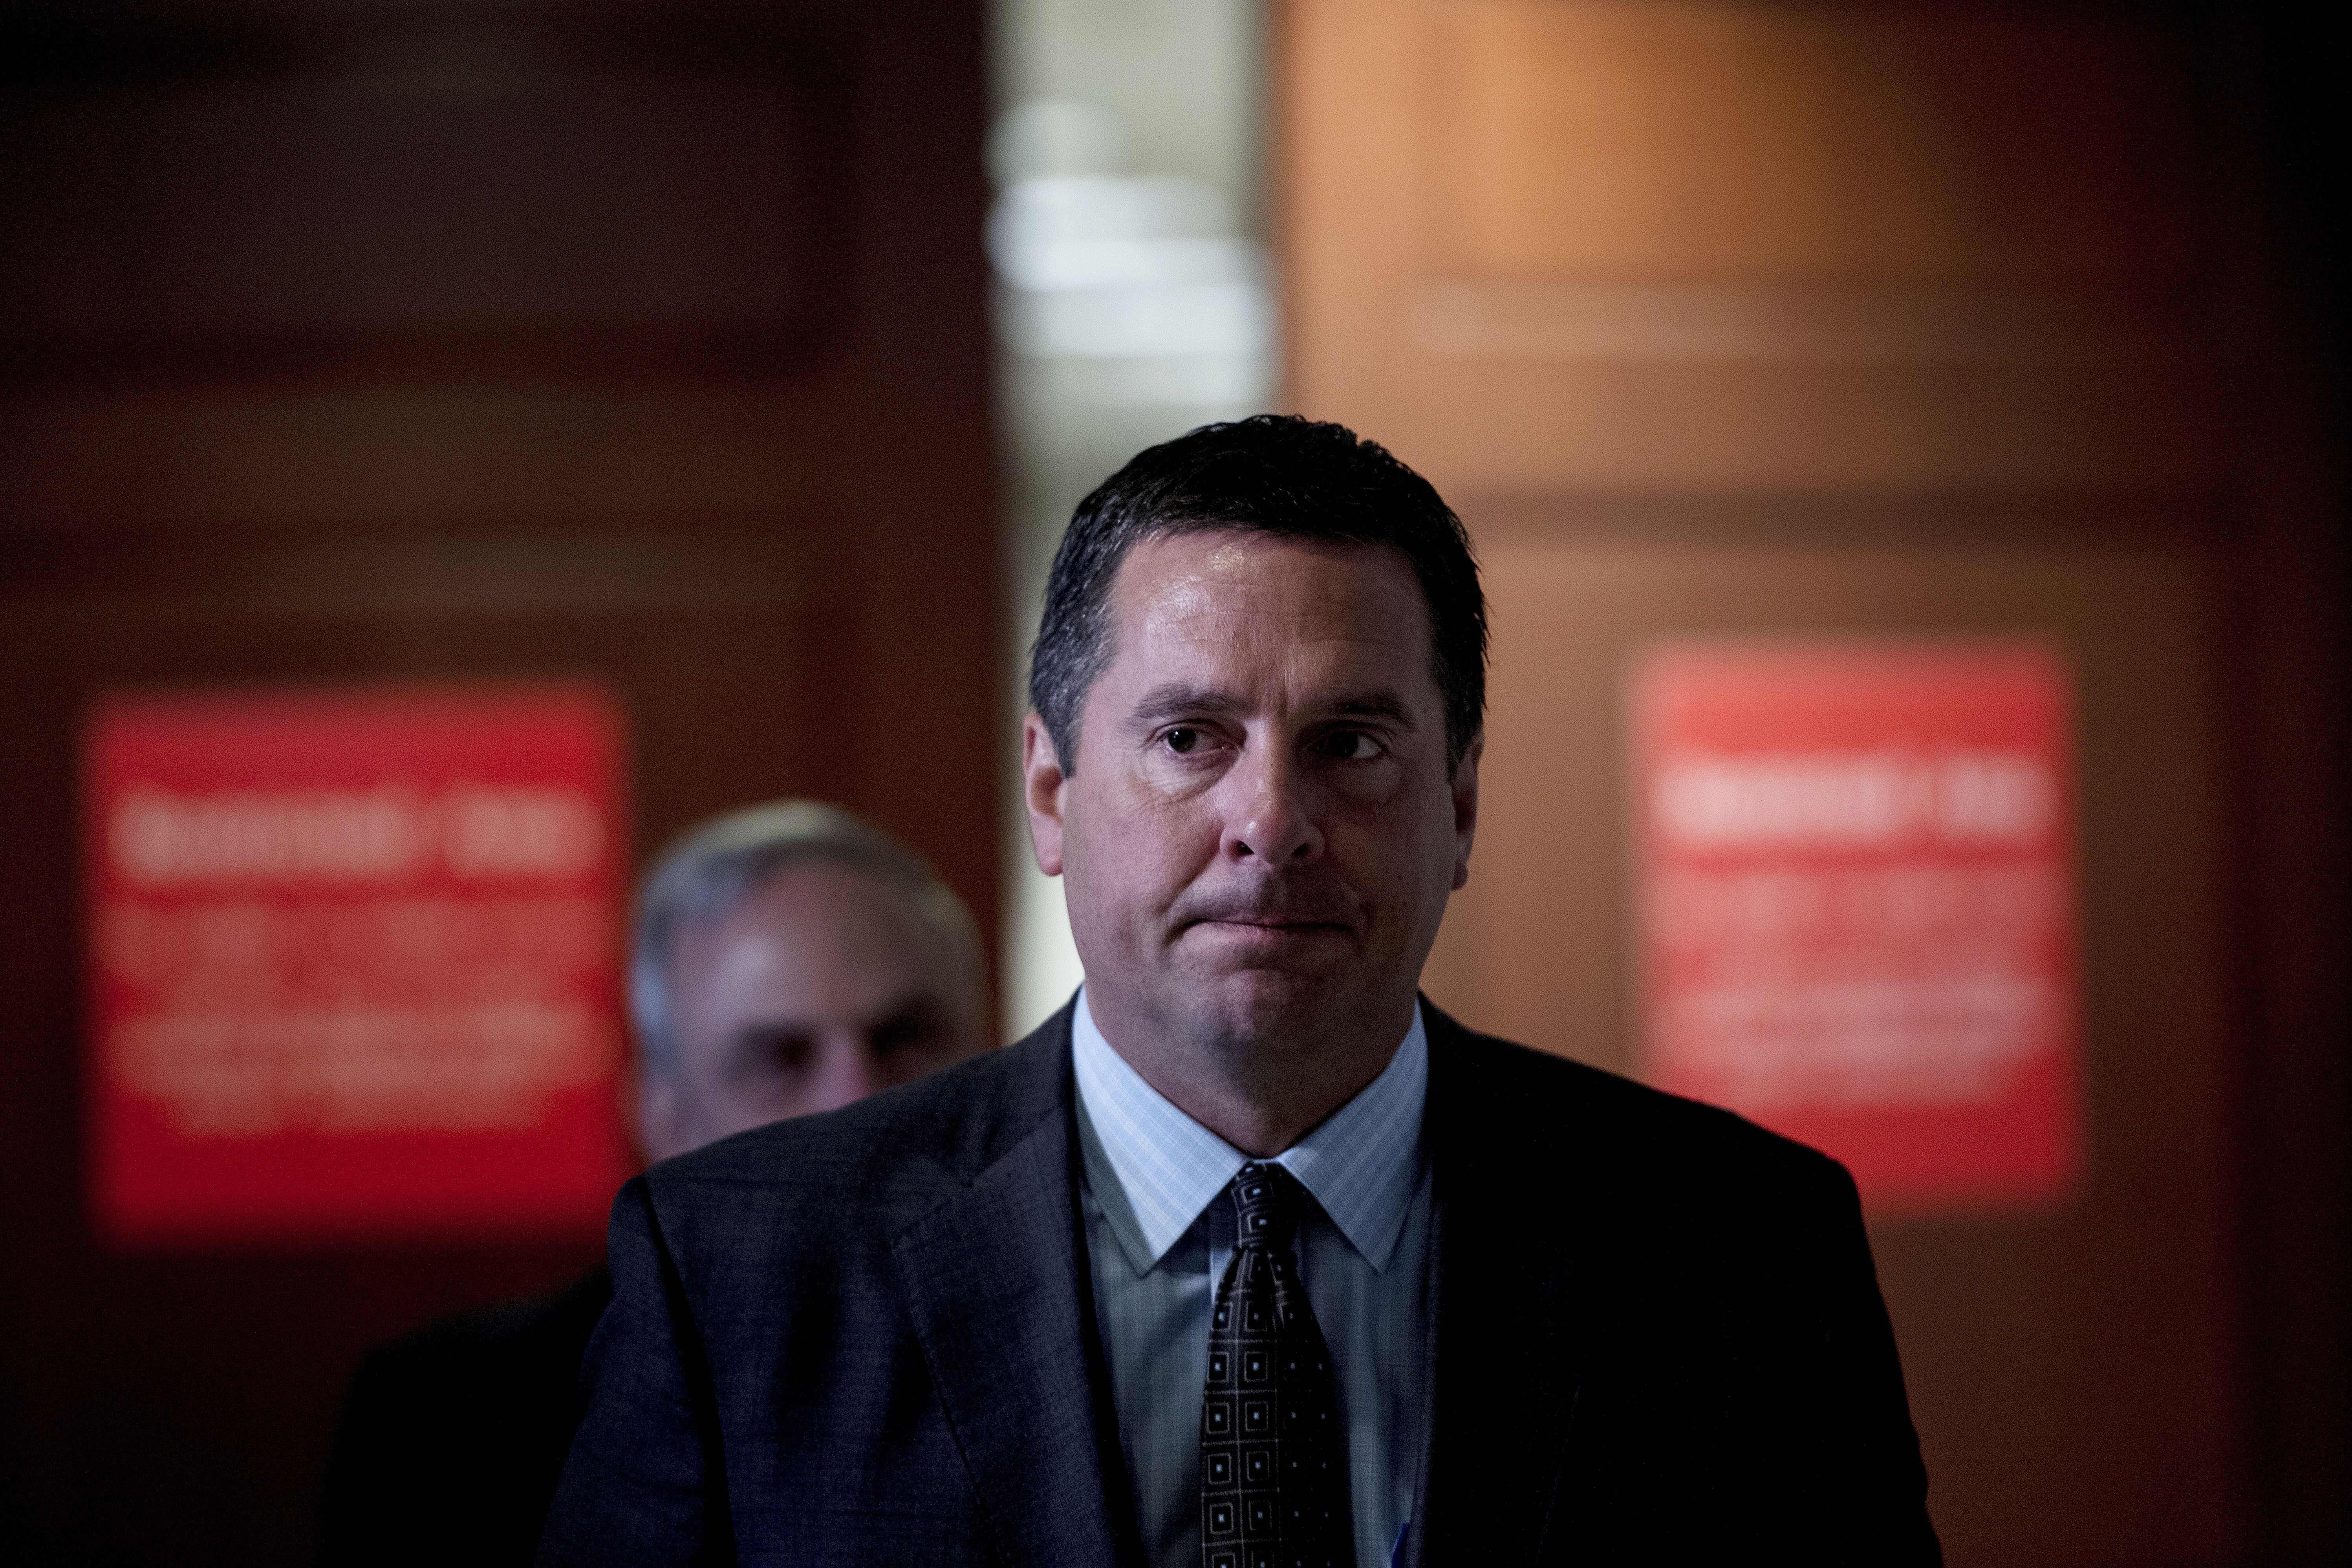 Rep. Devin Nunes on Capitol Hill on July 25.